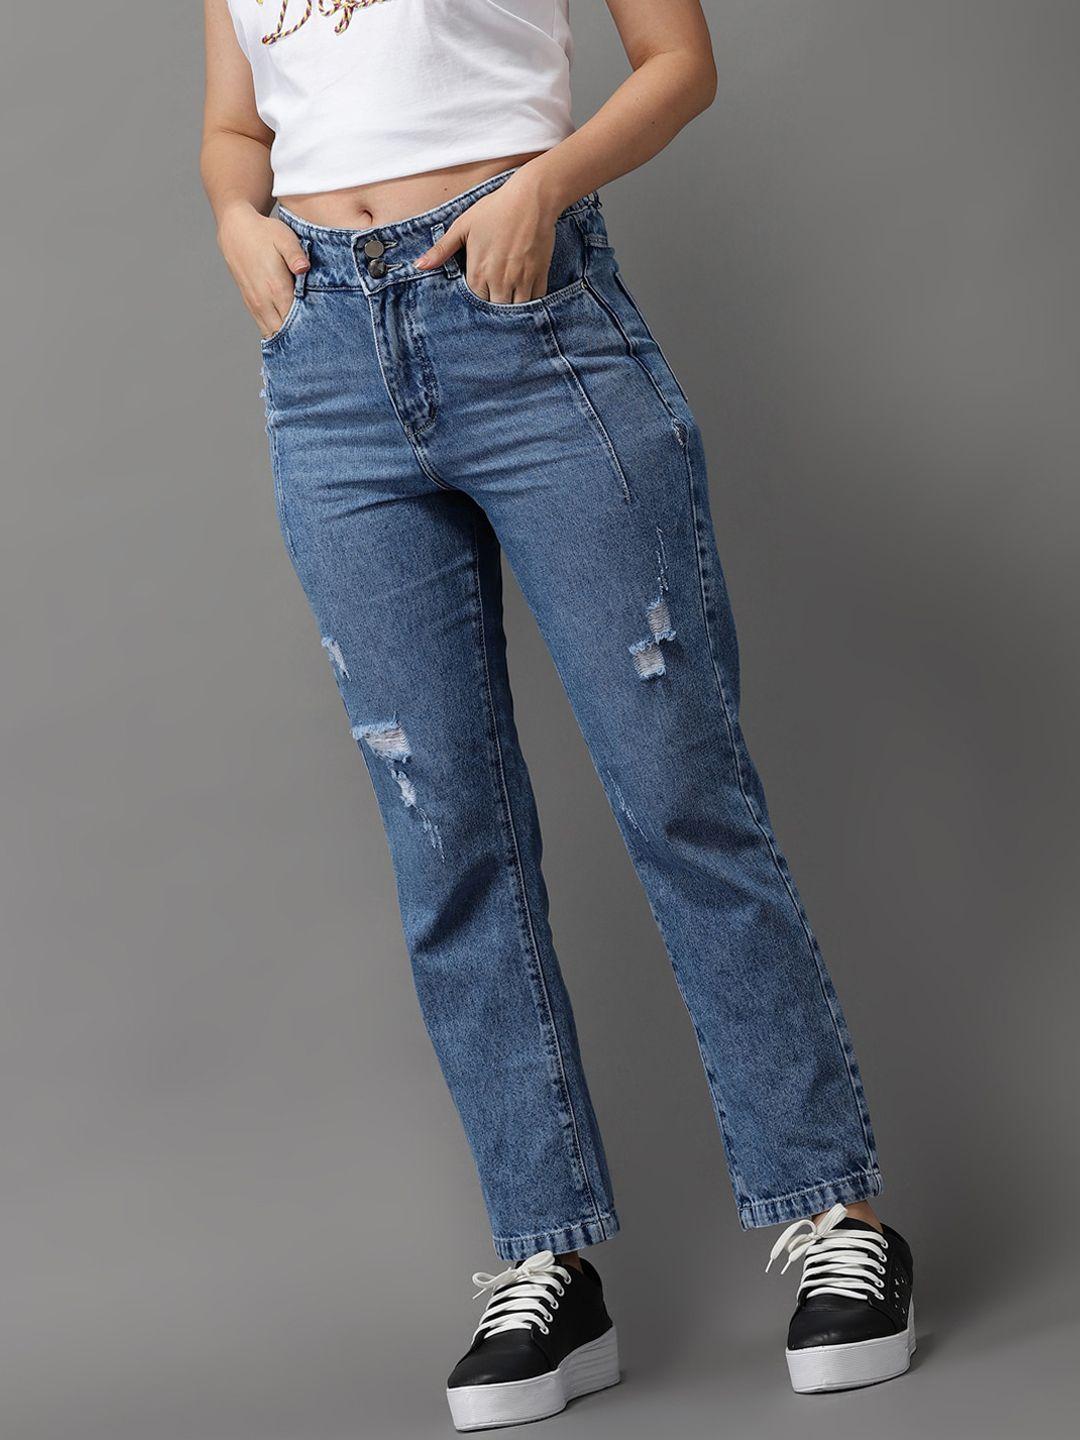 showoff-women-blue-jean-straight-fit-high-rise-mildly-distressed-light-fade-jeans